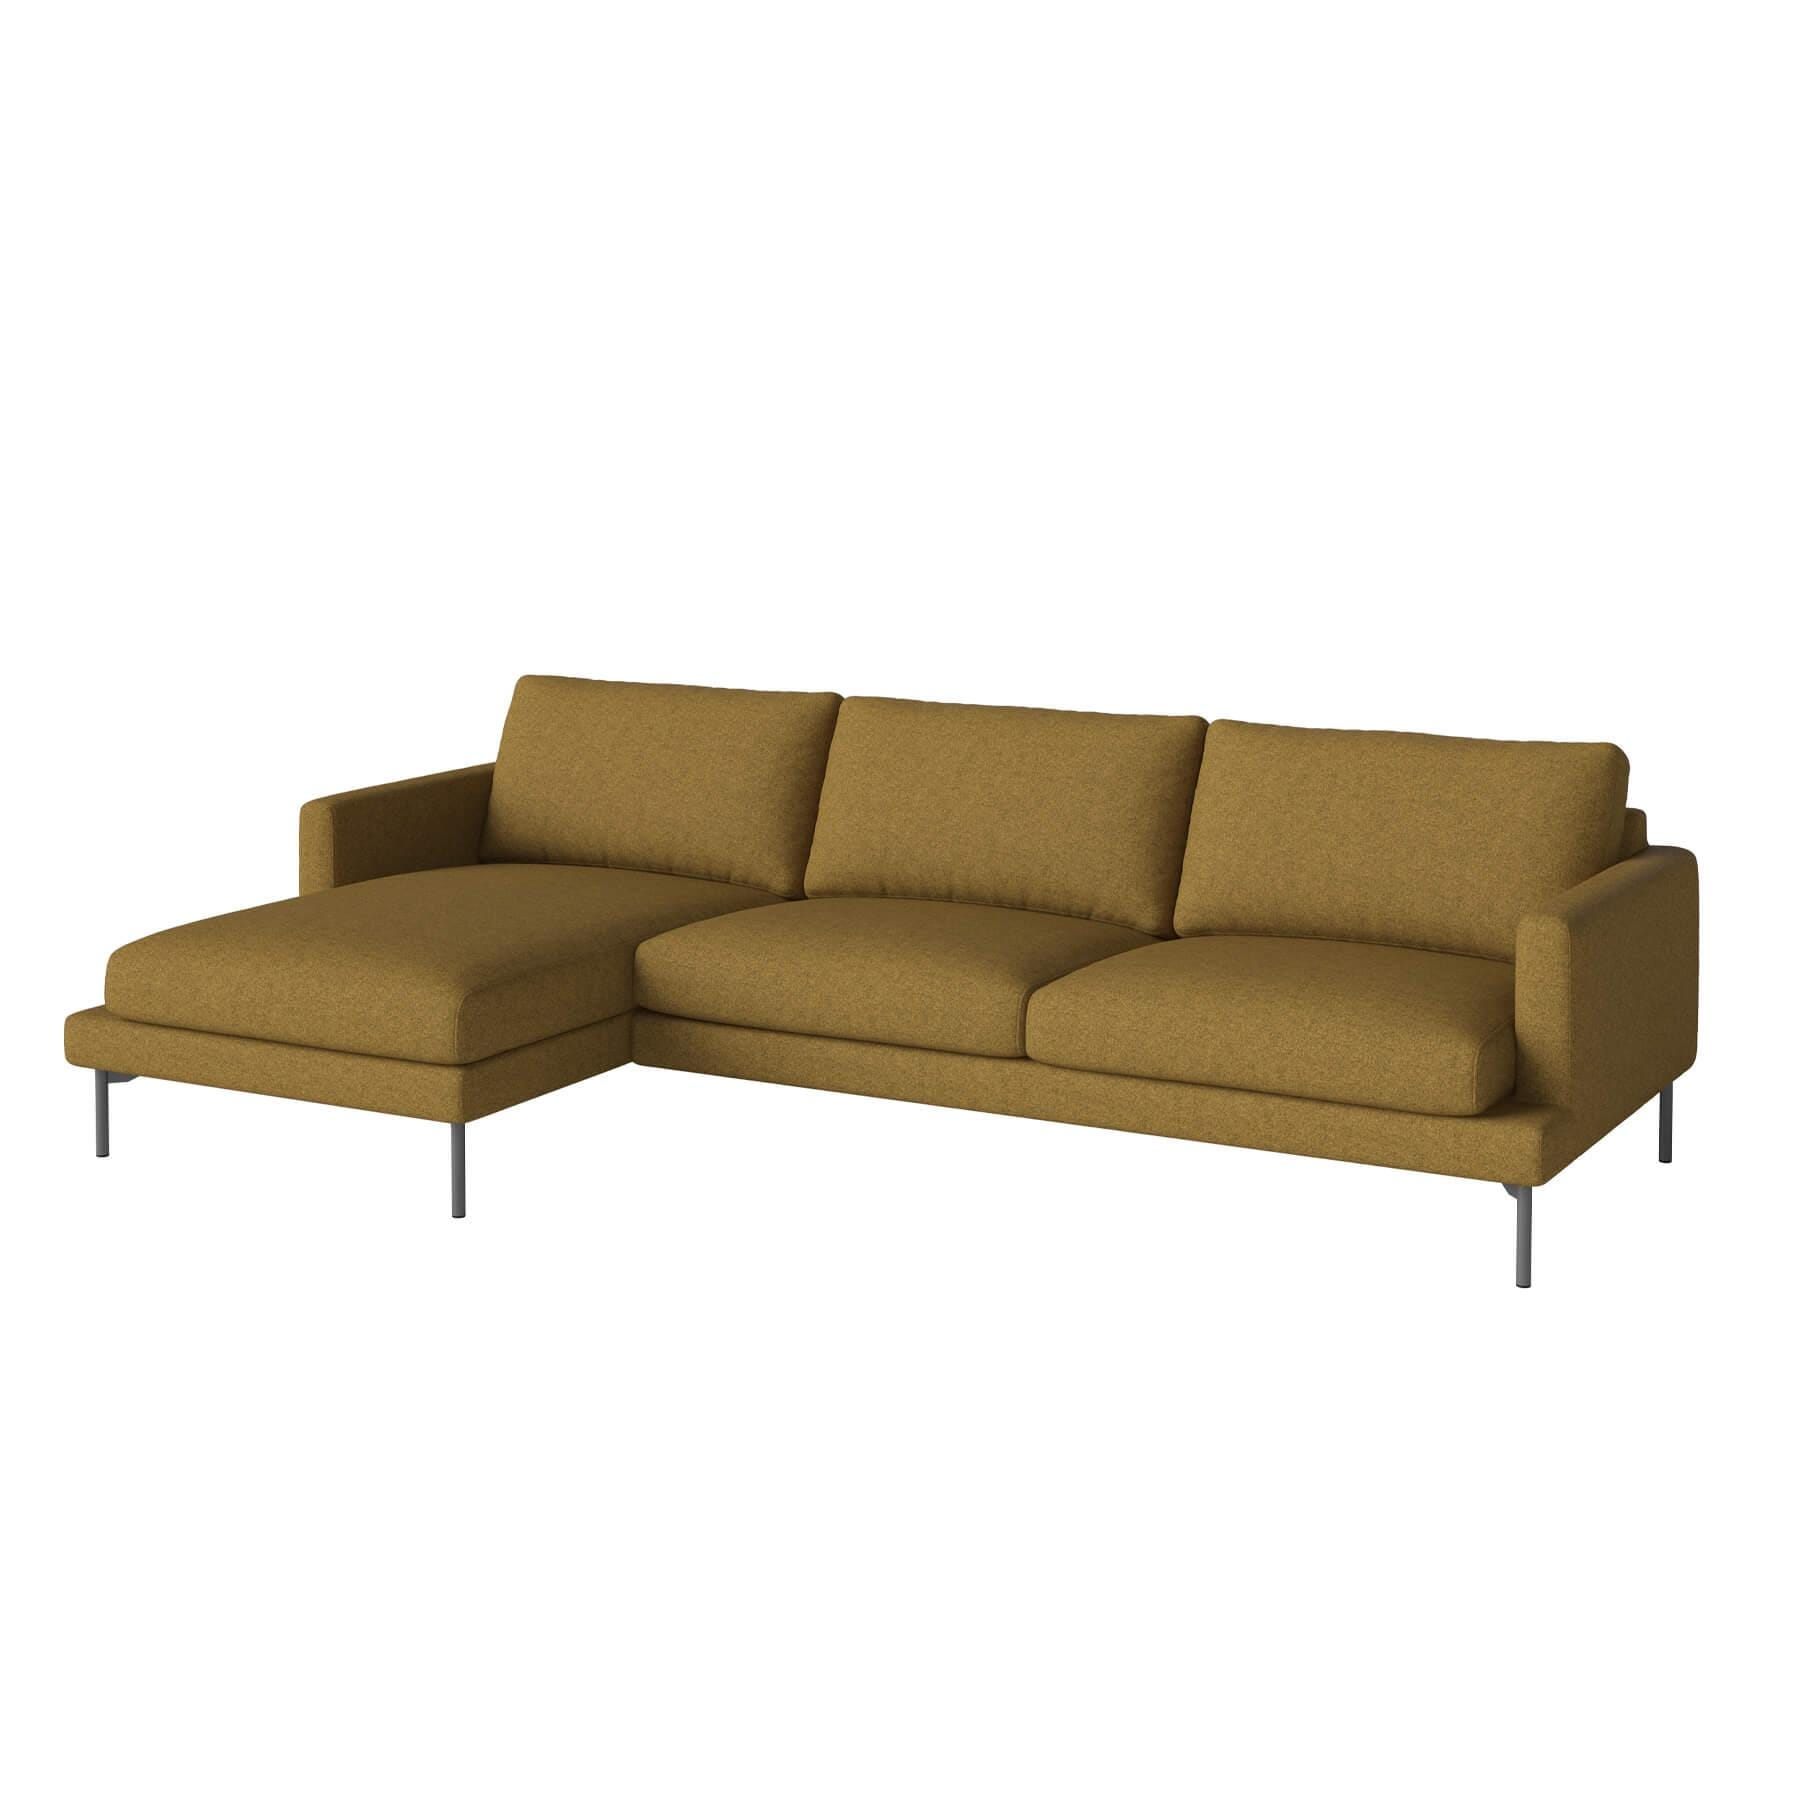 Bolia Veneda Sofa 35 Seater Sofa With Chaise Longue Grey Laquered Steel Qual Curry Left Brown Designer Furniture From Holloways Of Ludlow